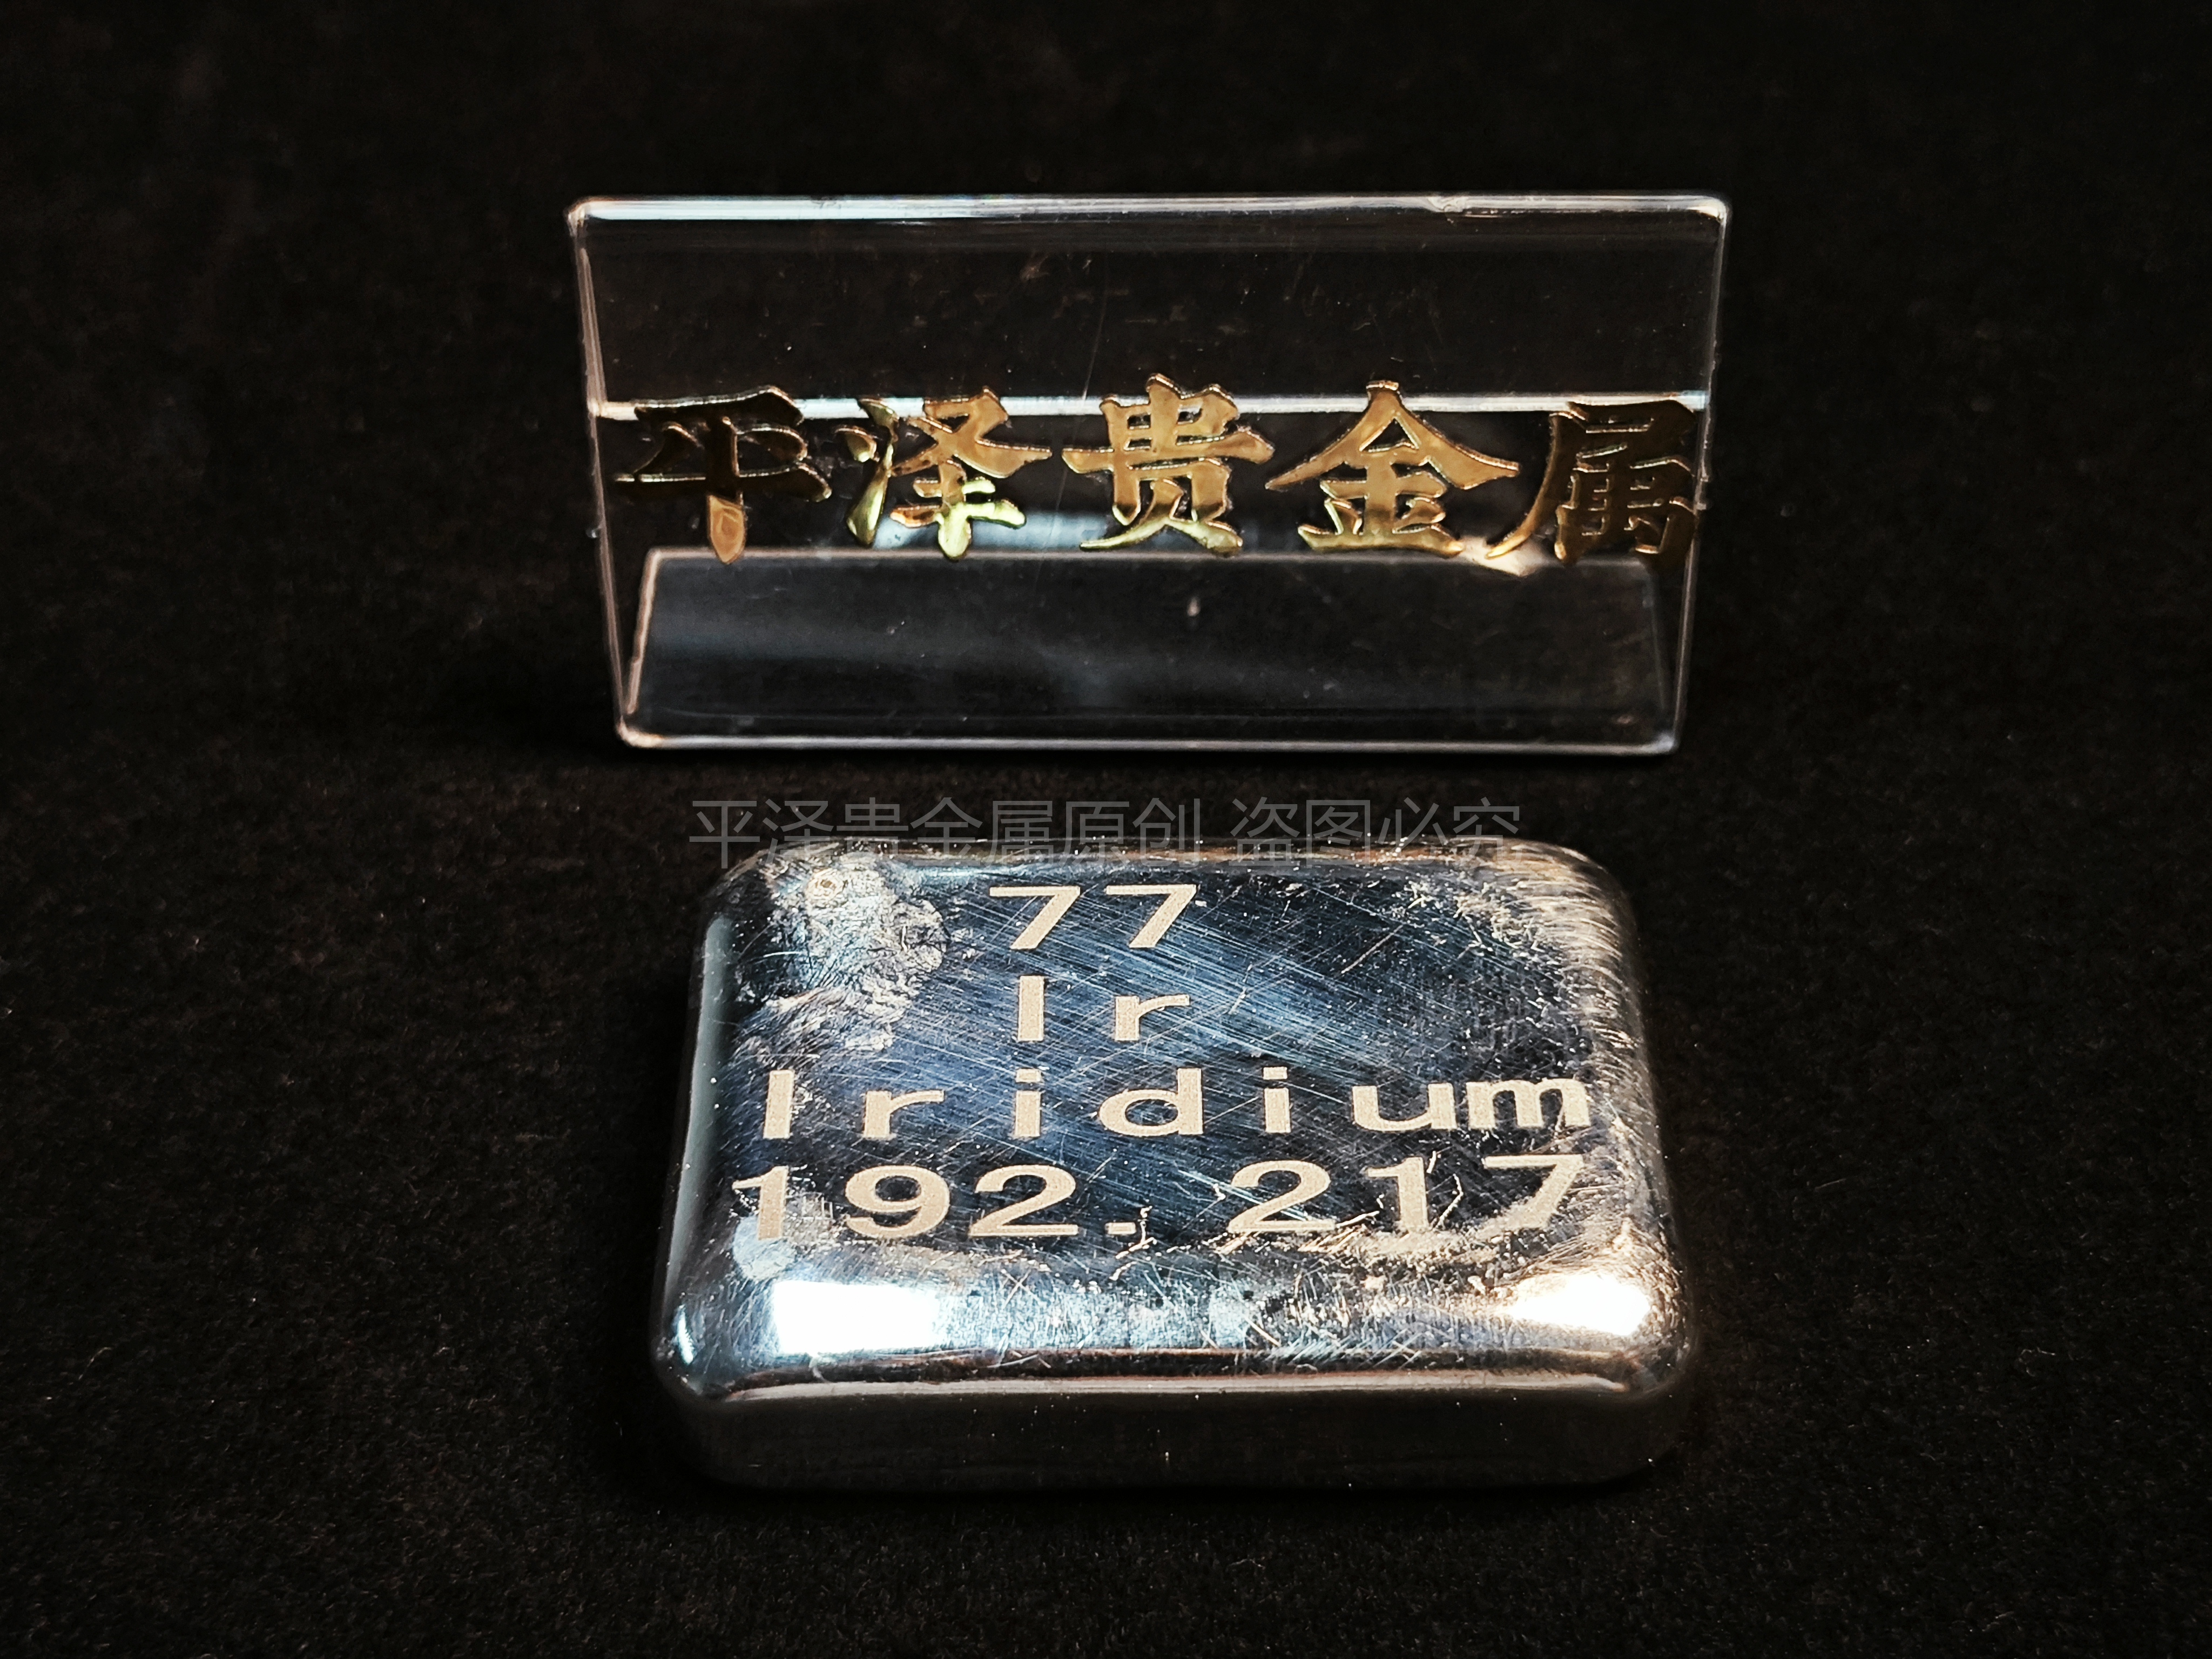 What’s the difference between iridium and rhodium, and the price of recycling it?